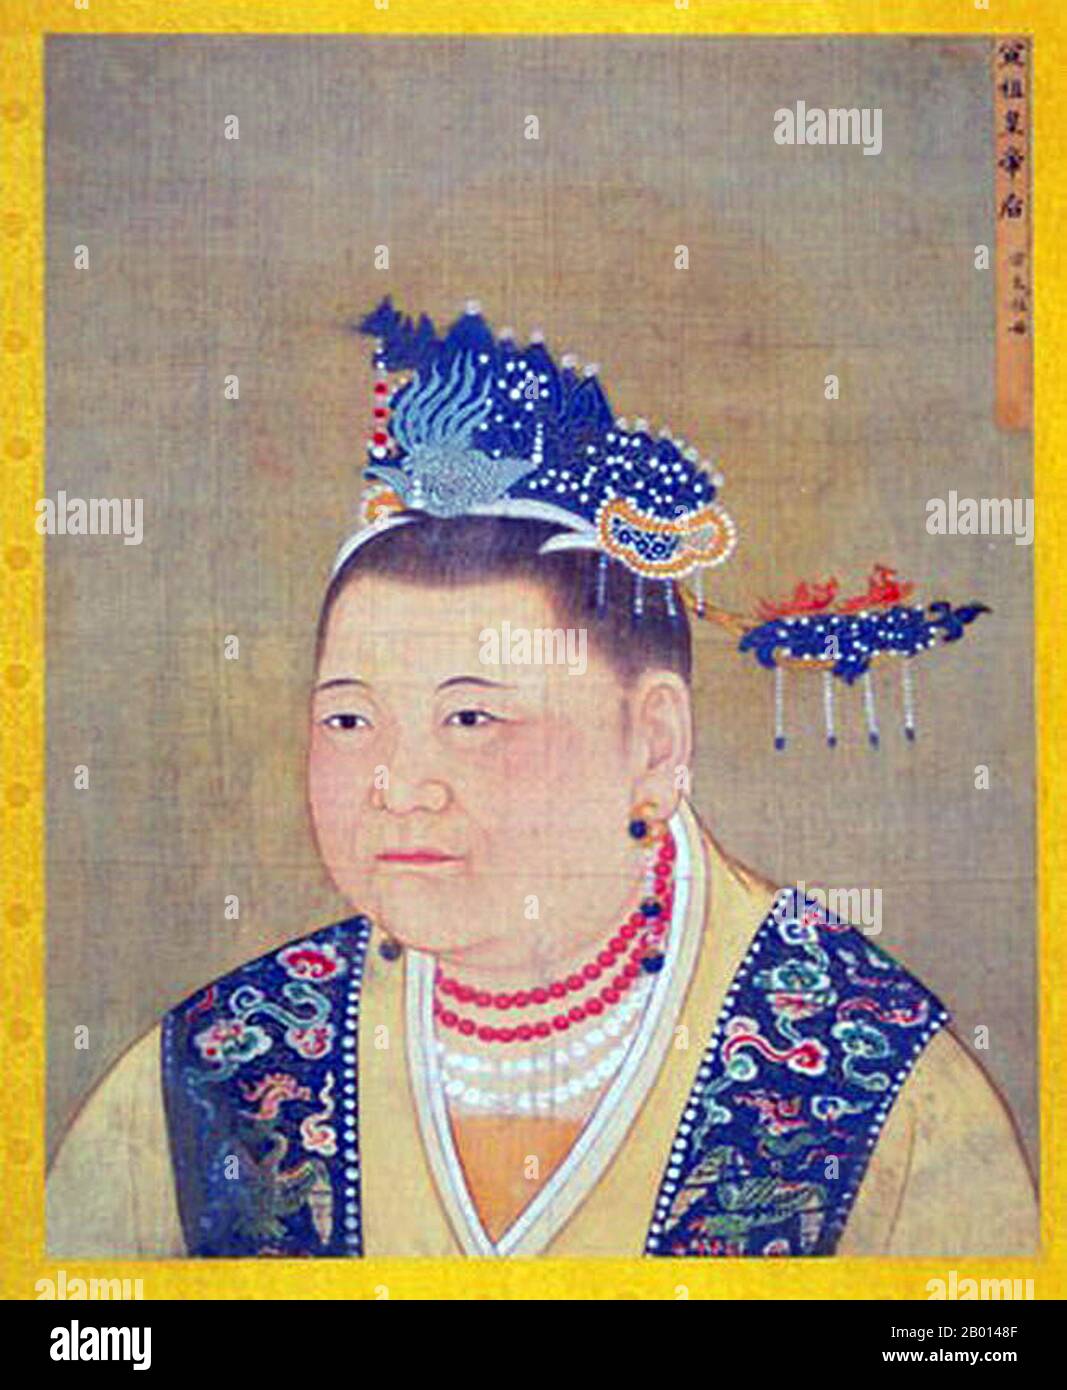 China: Empress Dowager Zhaoxian (902 - 17 July 961), mother of the first two Song emperors Taizu and Taizong. Hanging scroll painting, Song Dynasty (960-1279).  Lady Du, formally known as Zhaoxian, was an empress dowager of the Song Dynasty. She was the wife of general Zhao Hongyin and mother of the first two Song emperors Taizu and Taizong. Emperor Taizong claimed legitimacy to the throne through her apparent will, allegedly sealed in a golden shelf at her death, though many historians believe he fabricated this. Stock Photo